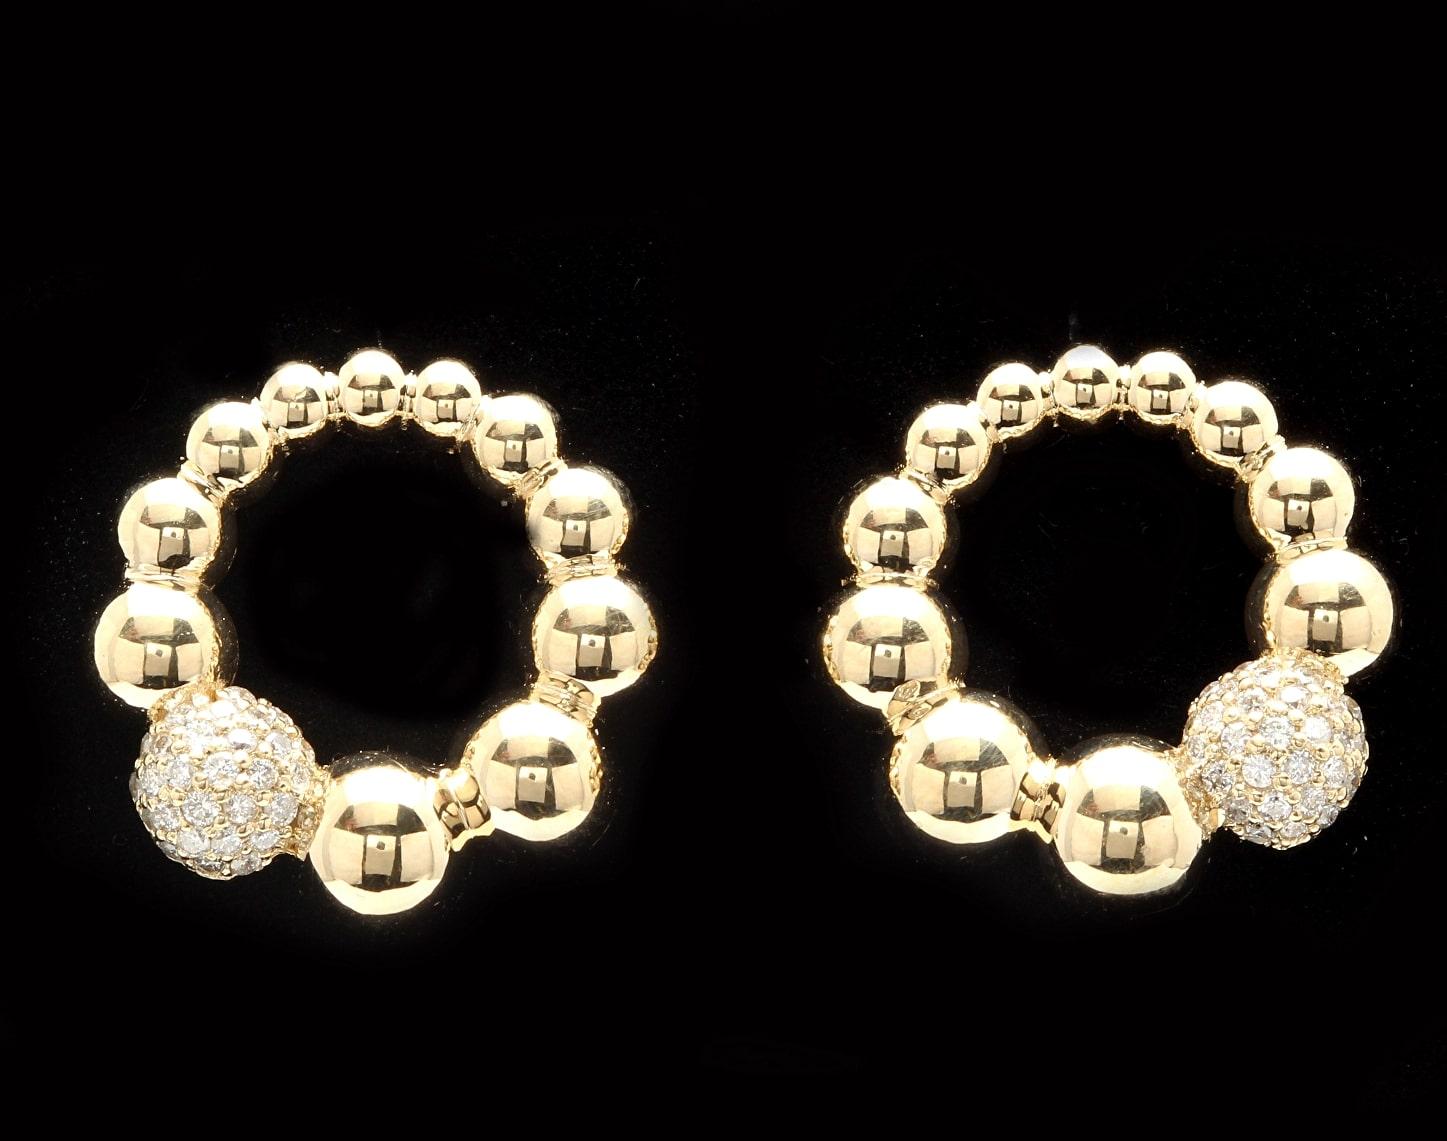 Exquisite 0.50 Carats Natural Diamond 14K Solid Yellow Gold Stud Earrings

Amazing looking piece! 

Suggested Replacement Value Approx. $3,000.00

Total Natural Round Cut White Diamonds Weight: Approx. 0.50 Carats (color G-H / Clarity